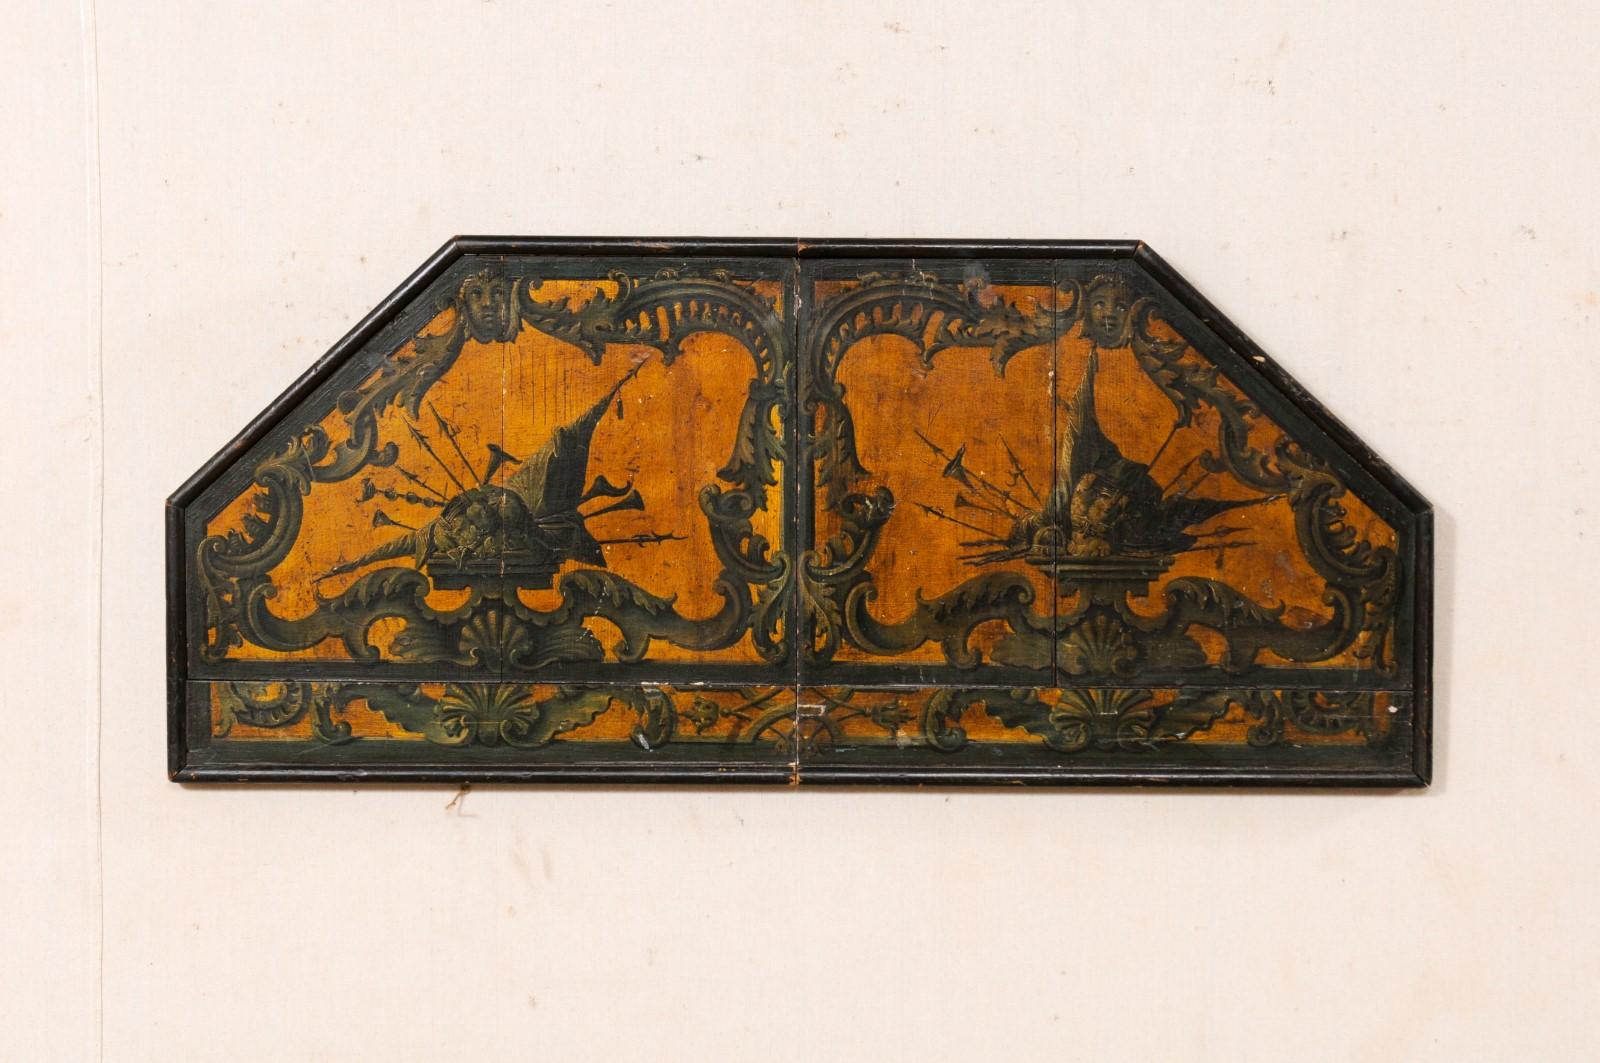 An Italian hand-painted wall plaque from the 18th century. This wall decoration from Italy has a half-octagon shape with longer flat section being at bottom-side of plaque. It has been hand-painted in a motif of horns, arrows, angels, and volutes.